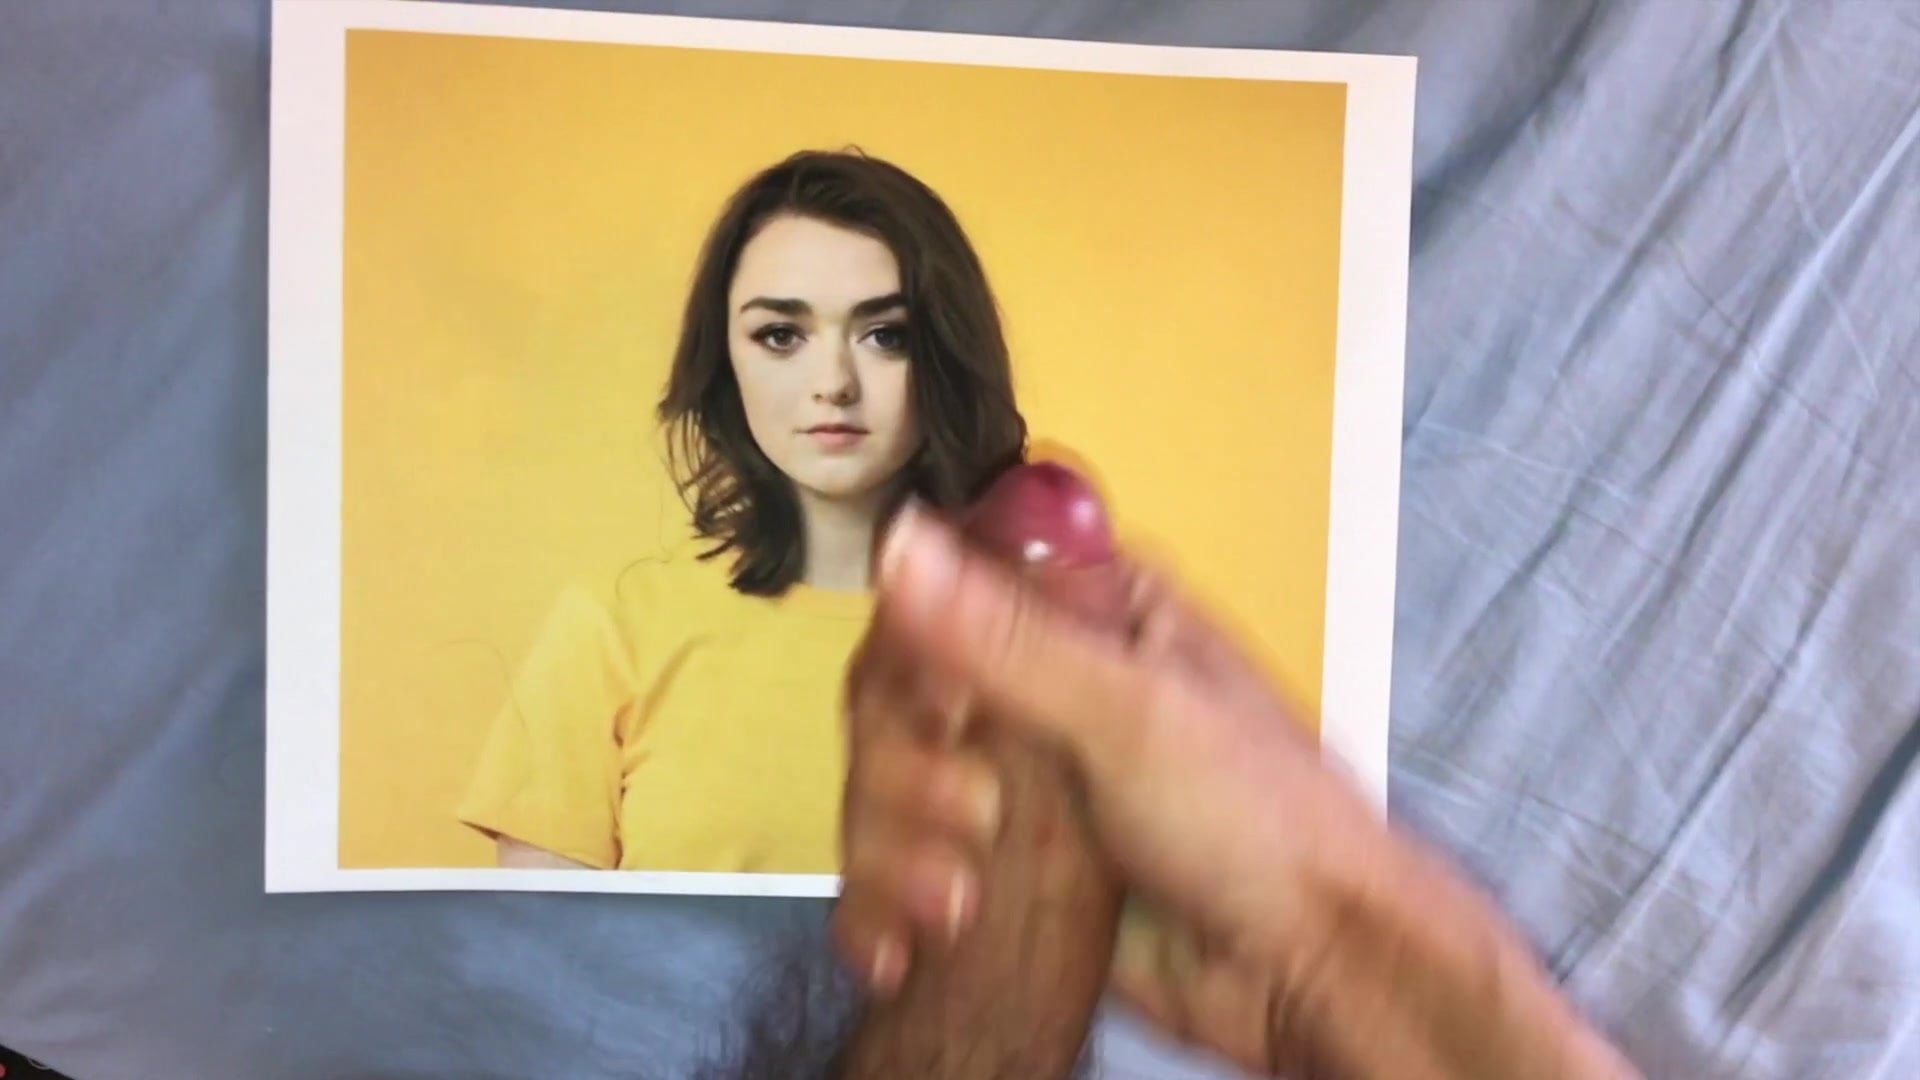 Watch Maisie Williams Cum Tribute 28 gay video on xHamster, the largest HD ...